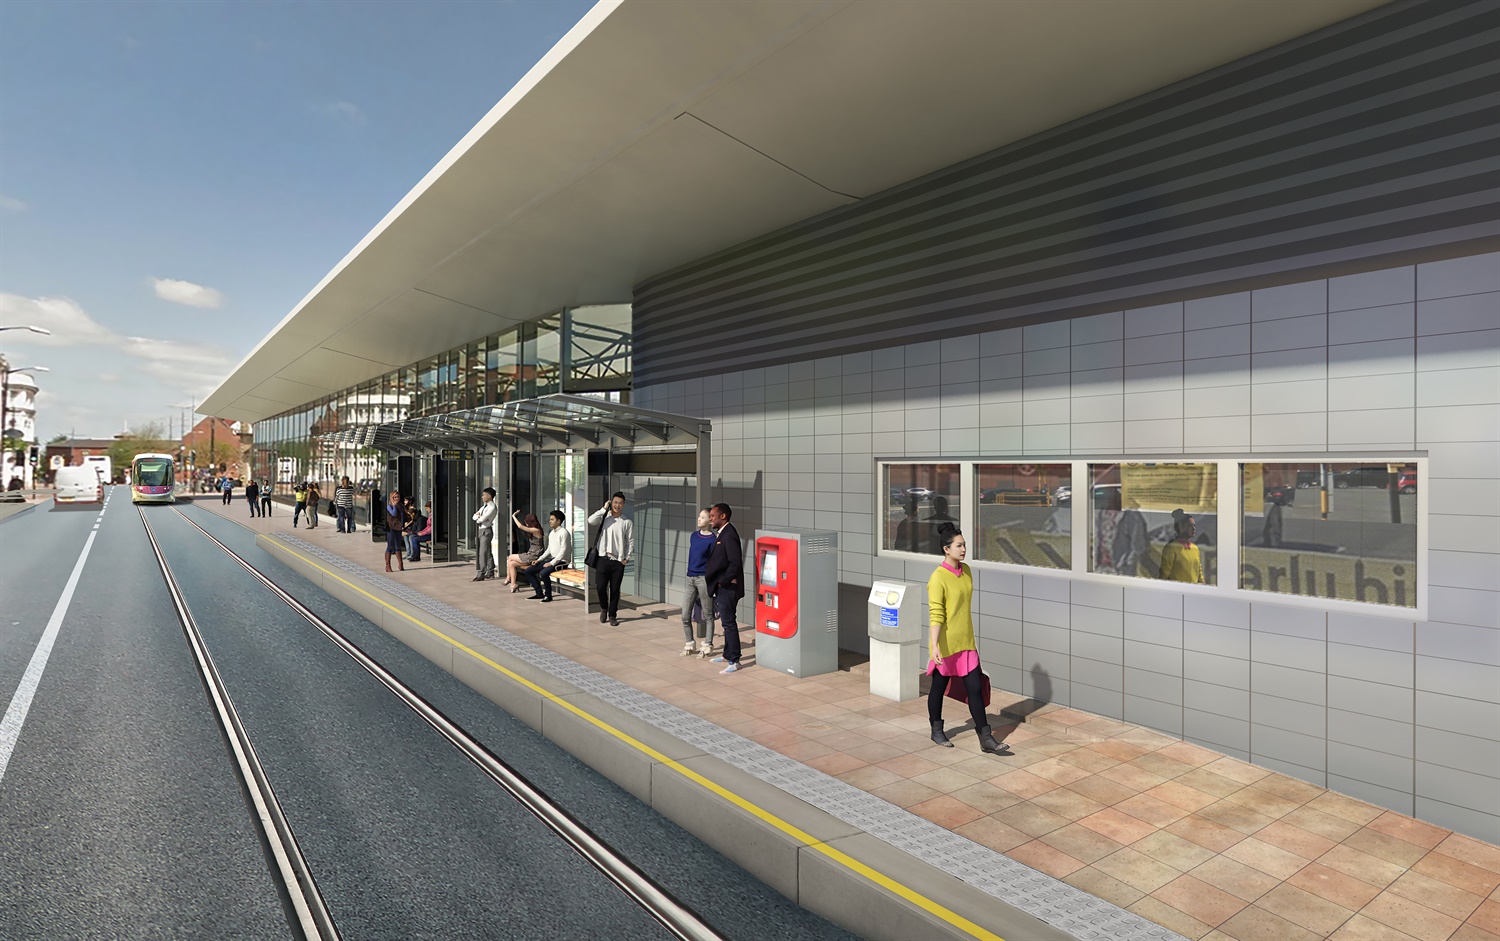 Next phase of £150m Wolverhampton tram extension to move forward in March